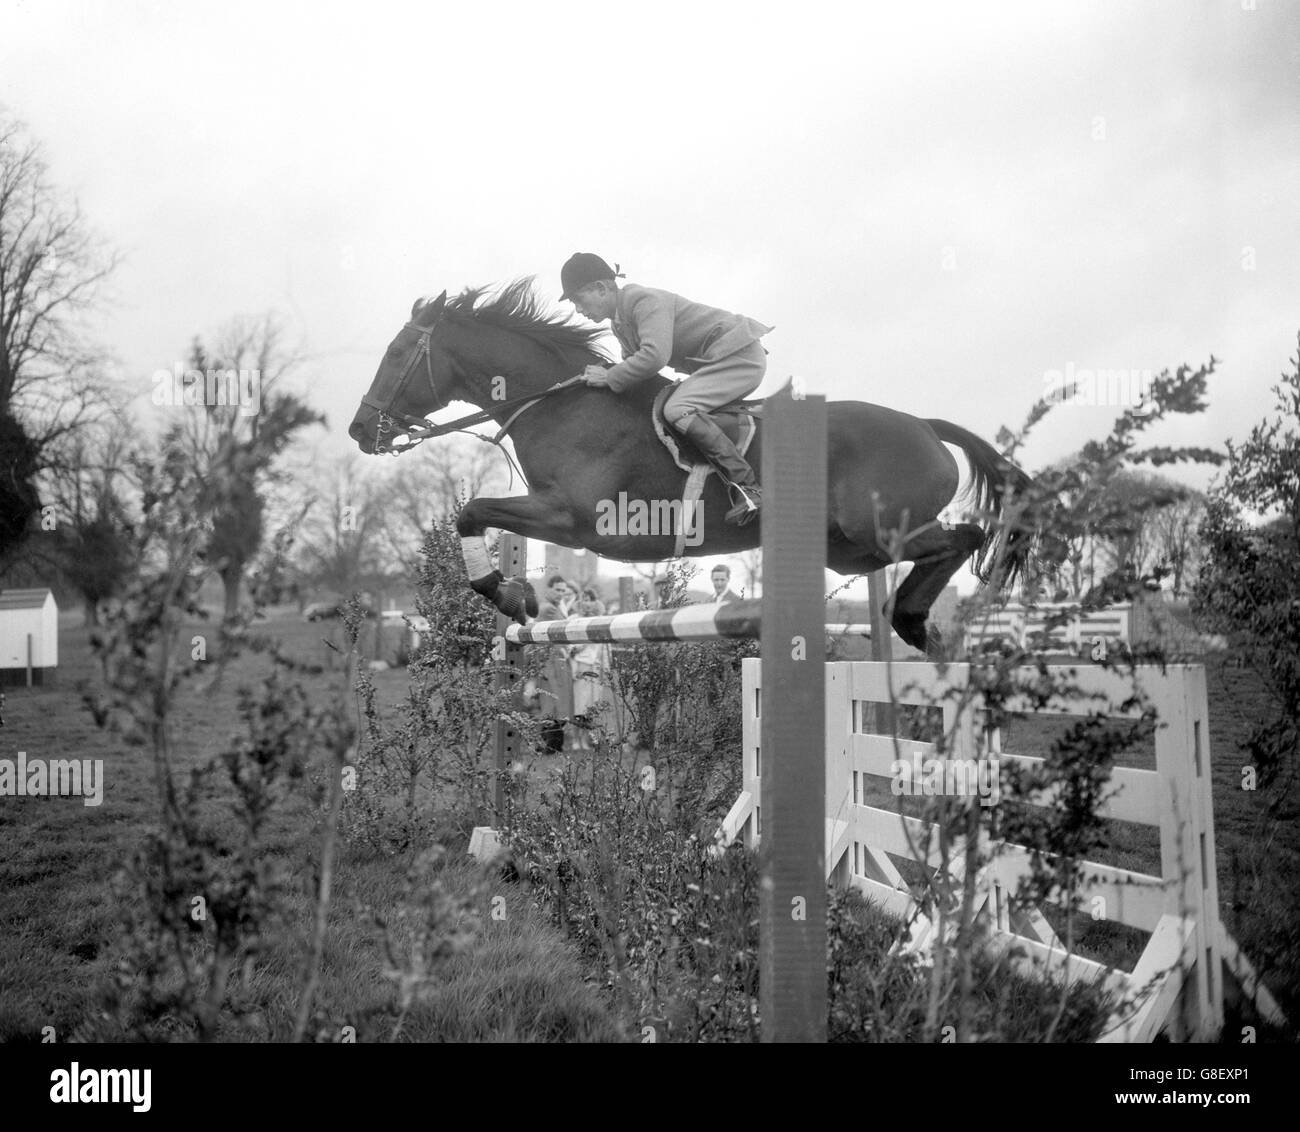 David Broome, 19, takes his mount, Wildfire III, over a stiff obstacle during training at Arundel, Sussex, for the Olympic Games to be held in Rome. David, from Chepstow, Monmouthshire, is one of seven riders invited by the British Show Jumping Association to train for the Olympics. Stock Photo